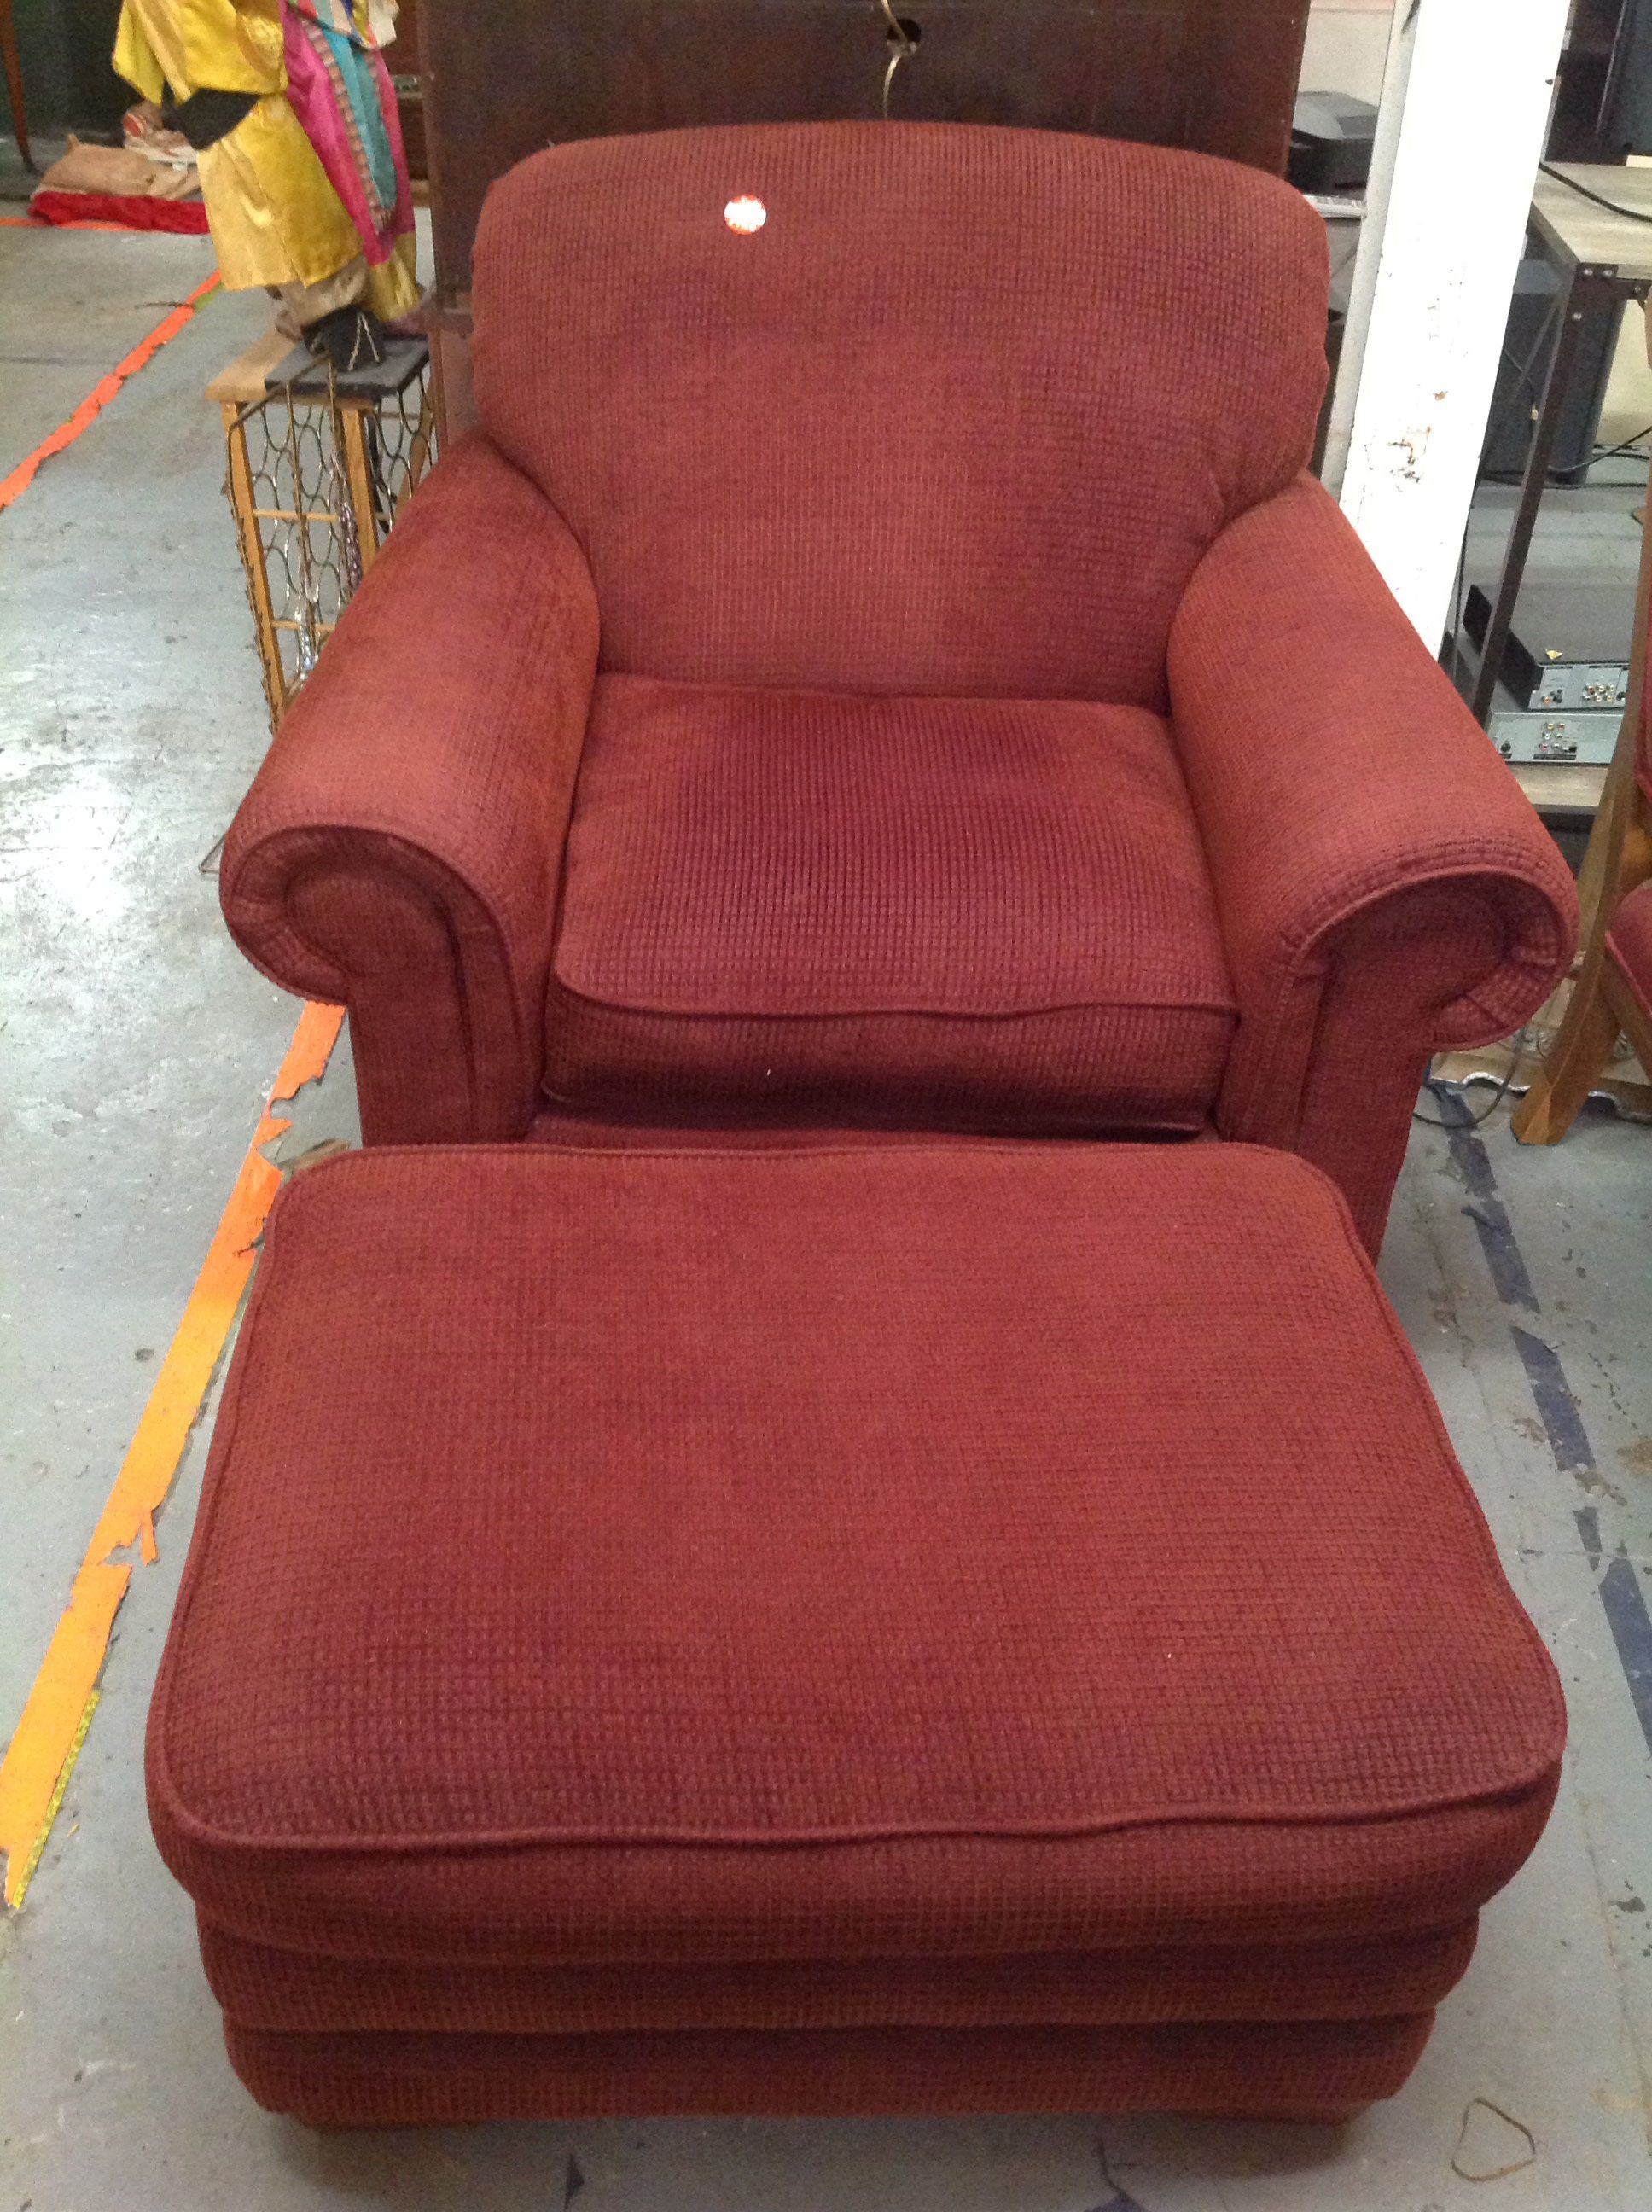 Ravishing Red Chair and Ottoman For Sale!!